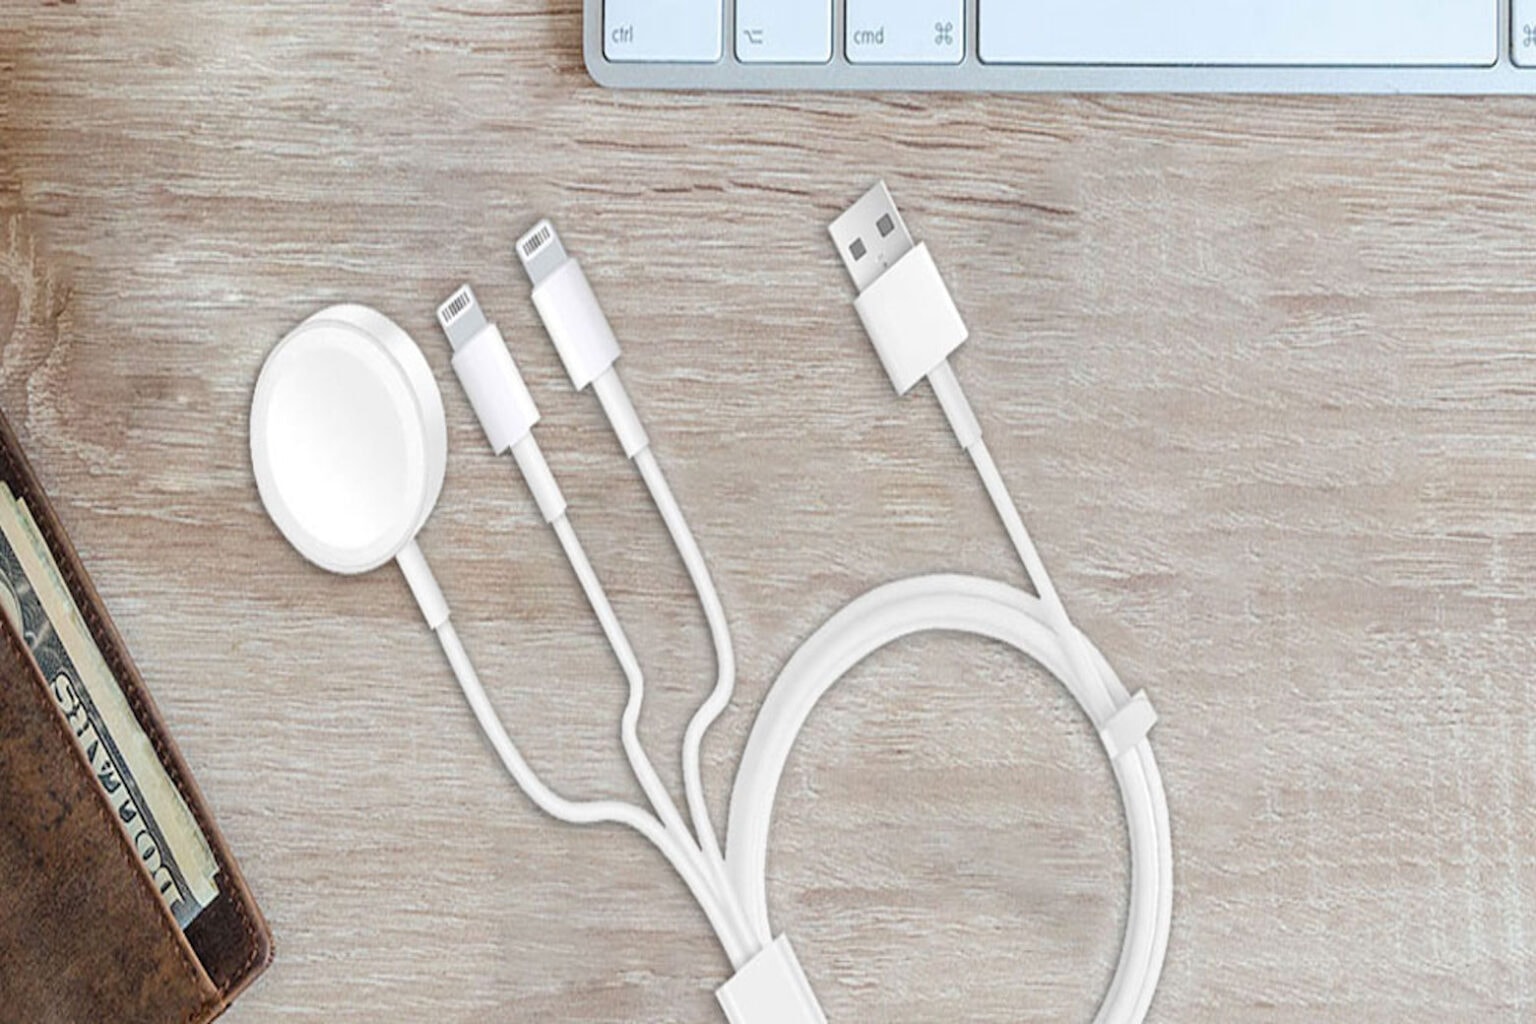 Power your iPhone, AirPods & Apple Watch with one cable.